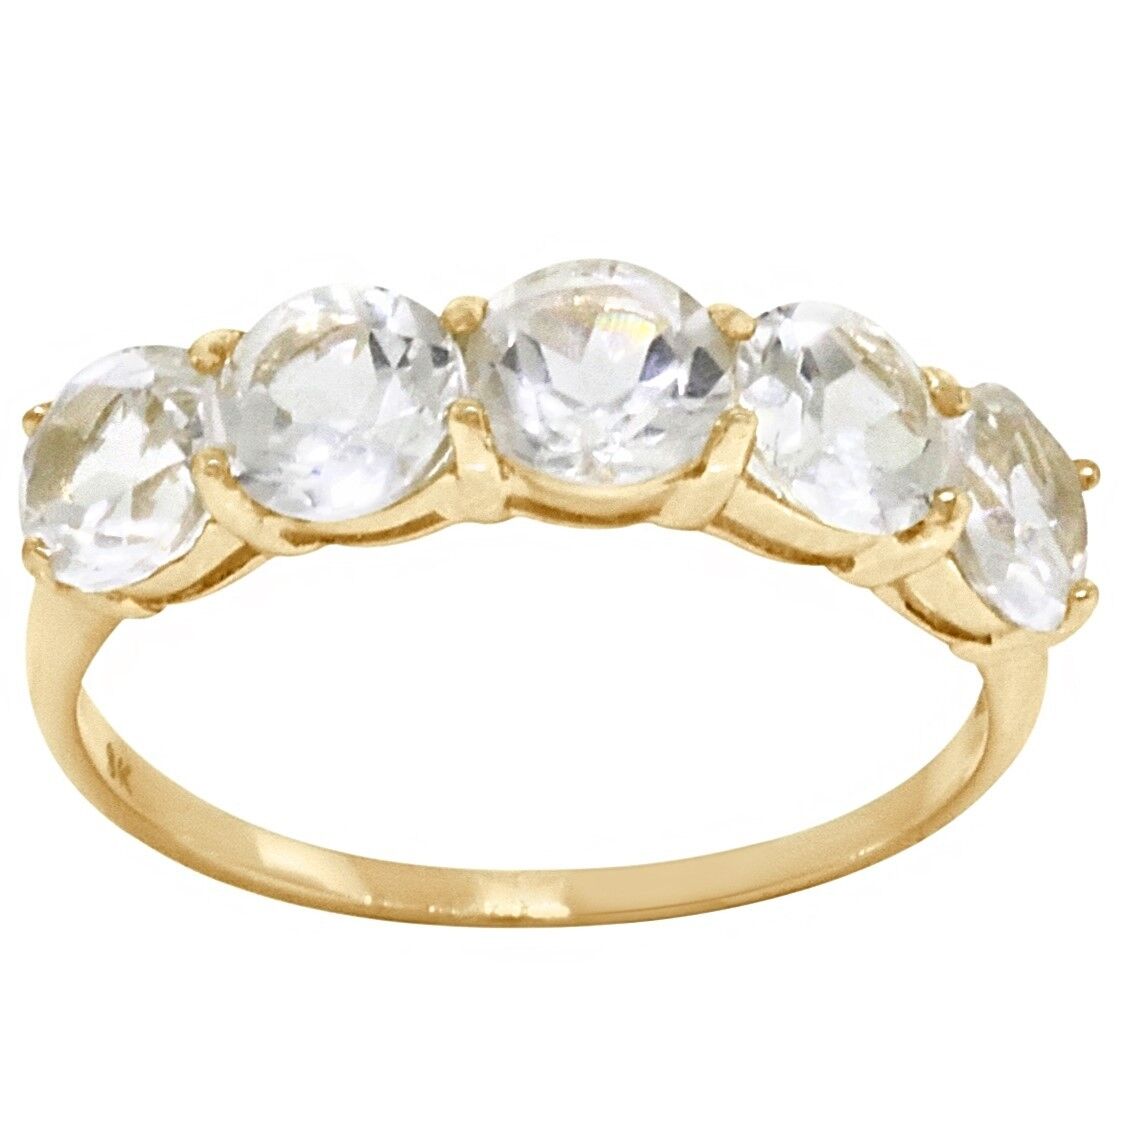 Natural 3.28ct White Sapphire 9ct 9K 375 Solid Gold Ring - 30 Day Refunds 